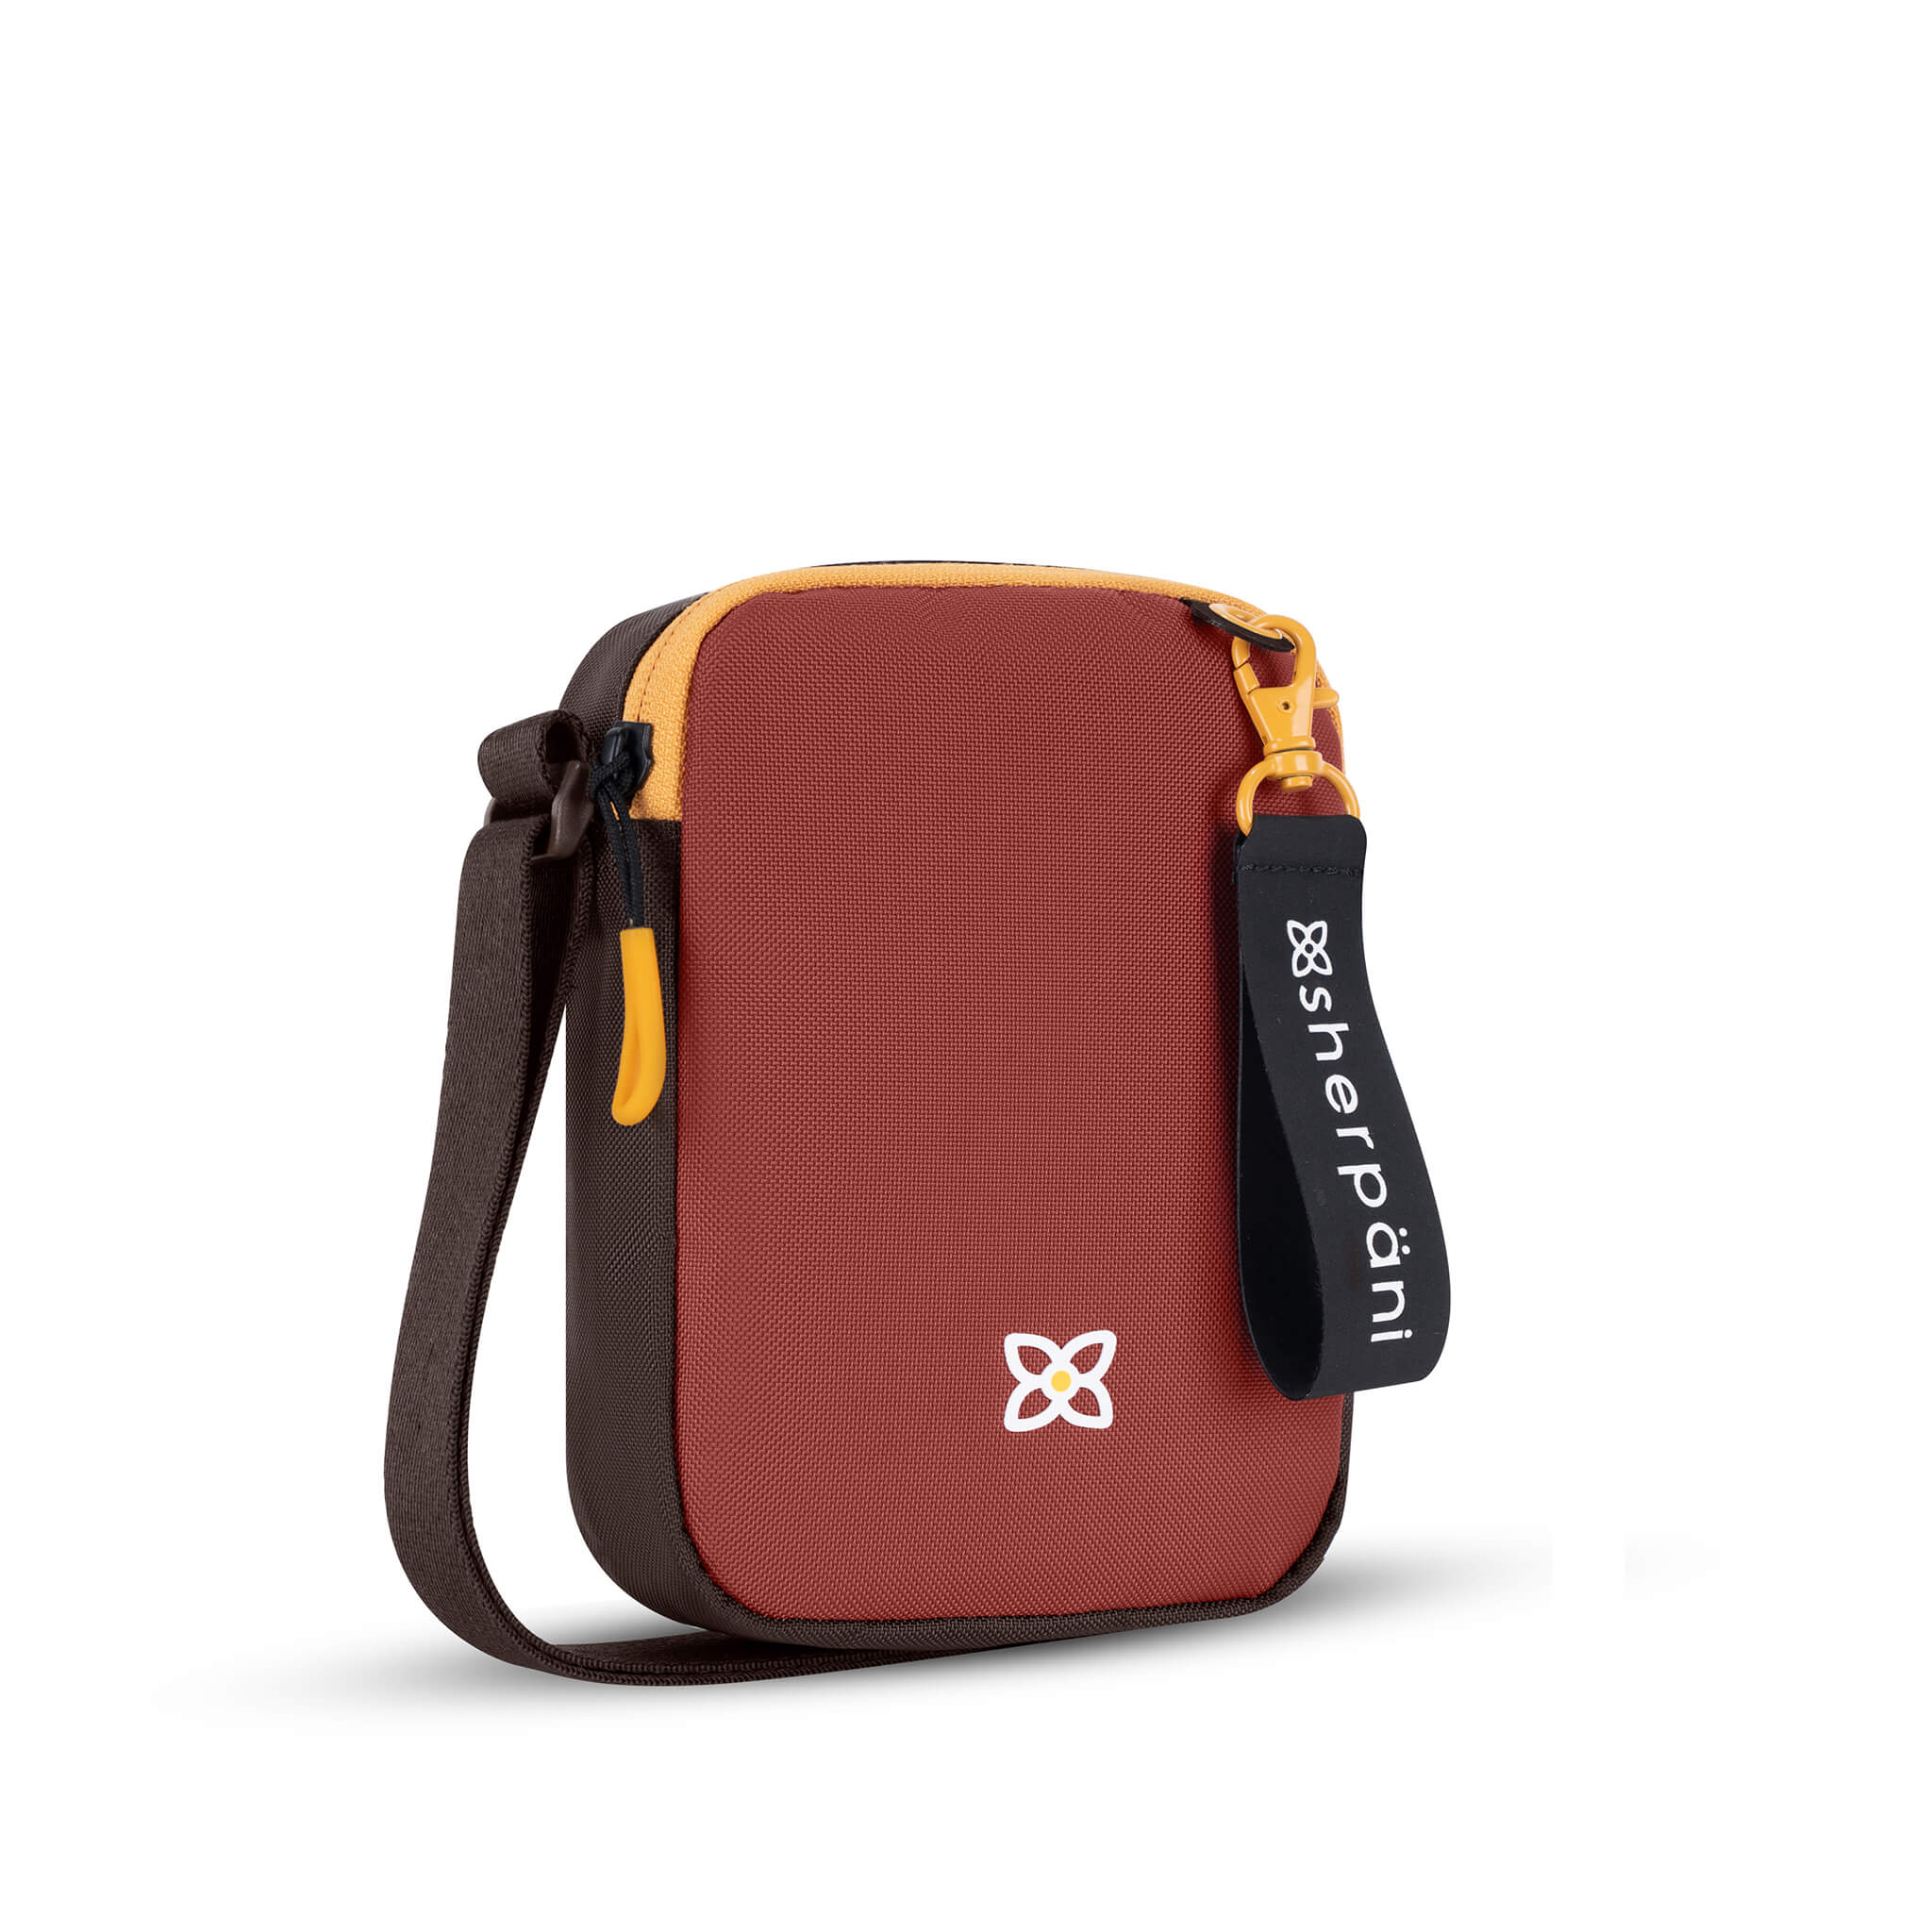 Angled front view of Sherpani mini crossbody purse, the Rogue in Cider. Rogue features include an adjustable crossbody strap, detachable keychain, compact design, minimalist bag and RFID protection. The Cider color is two-toned in burgundy and dark brown with yellow accents. #color_cider